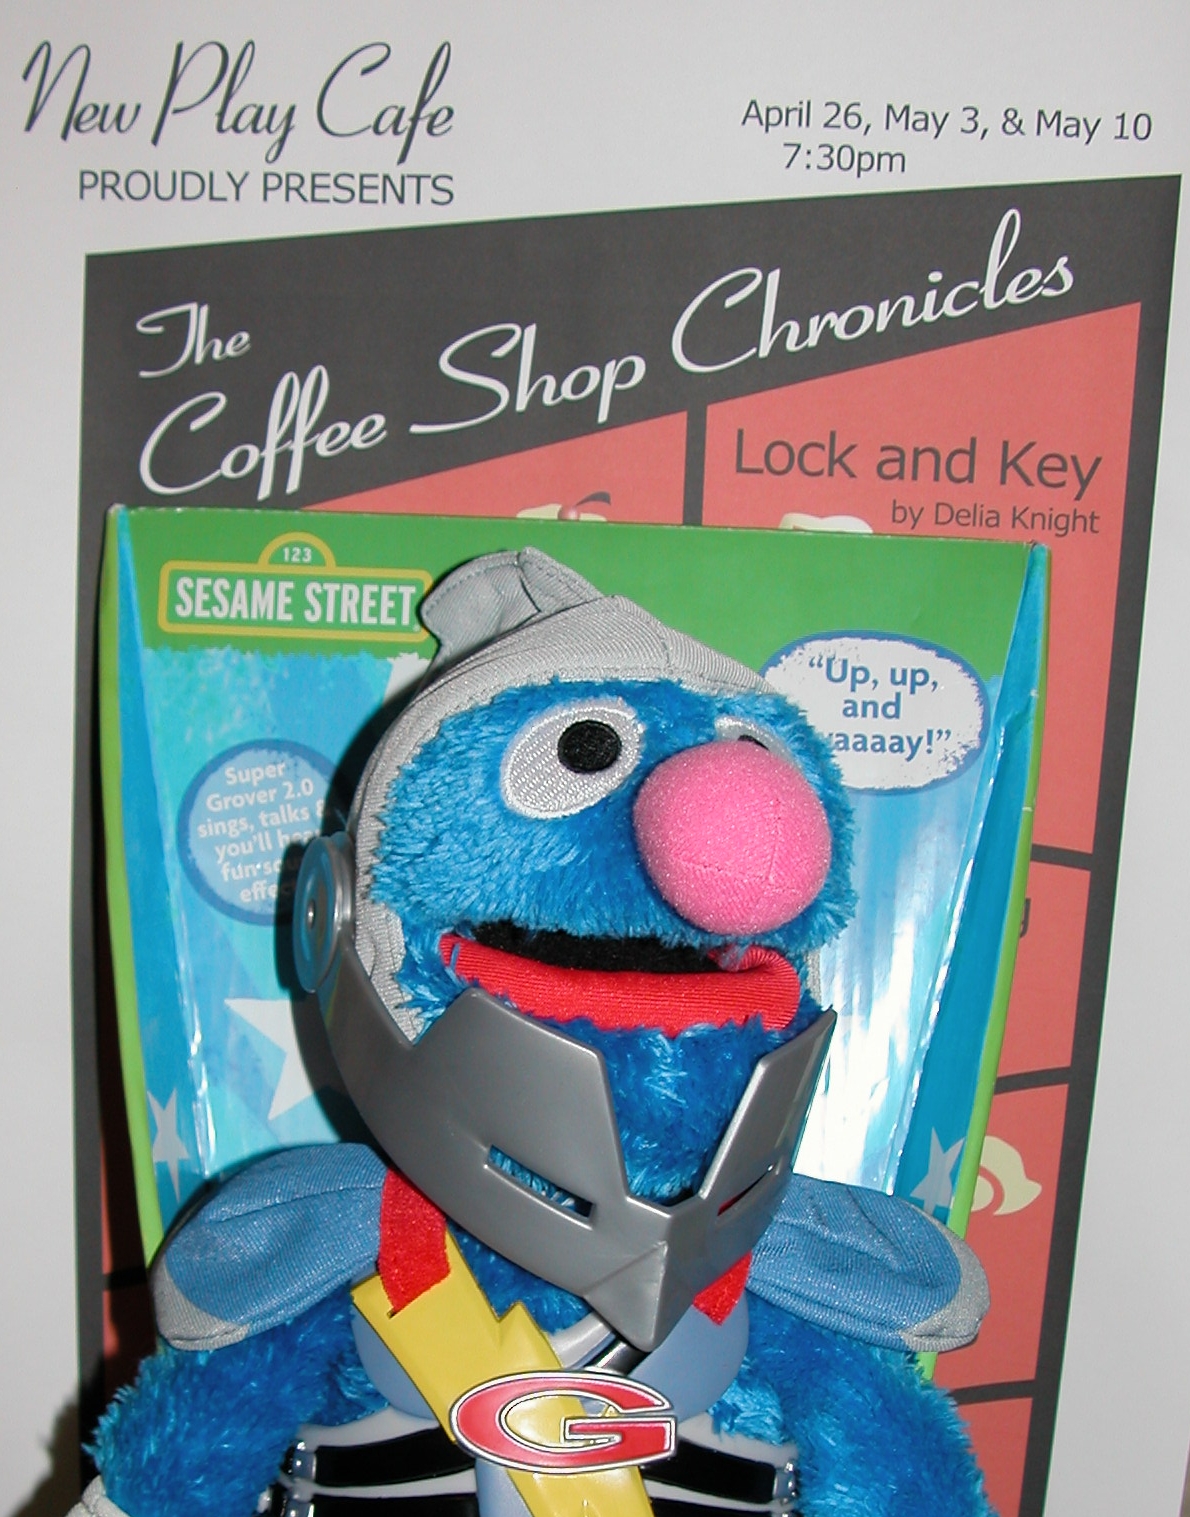 Super Grover: Pretty cool but I still miss Knitted Grover and hope he will understand